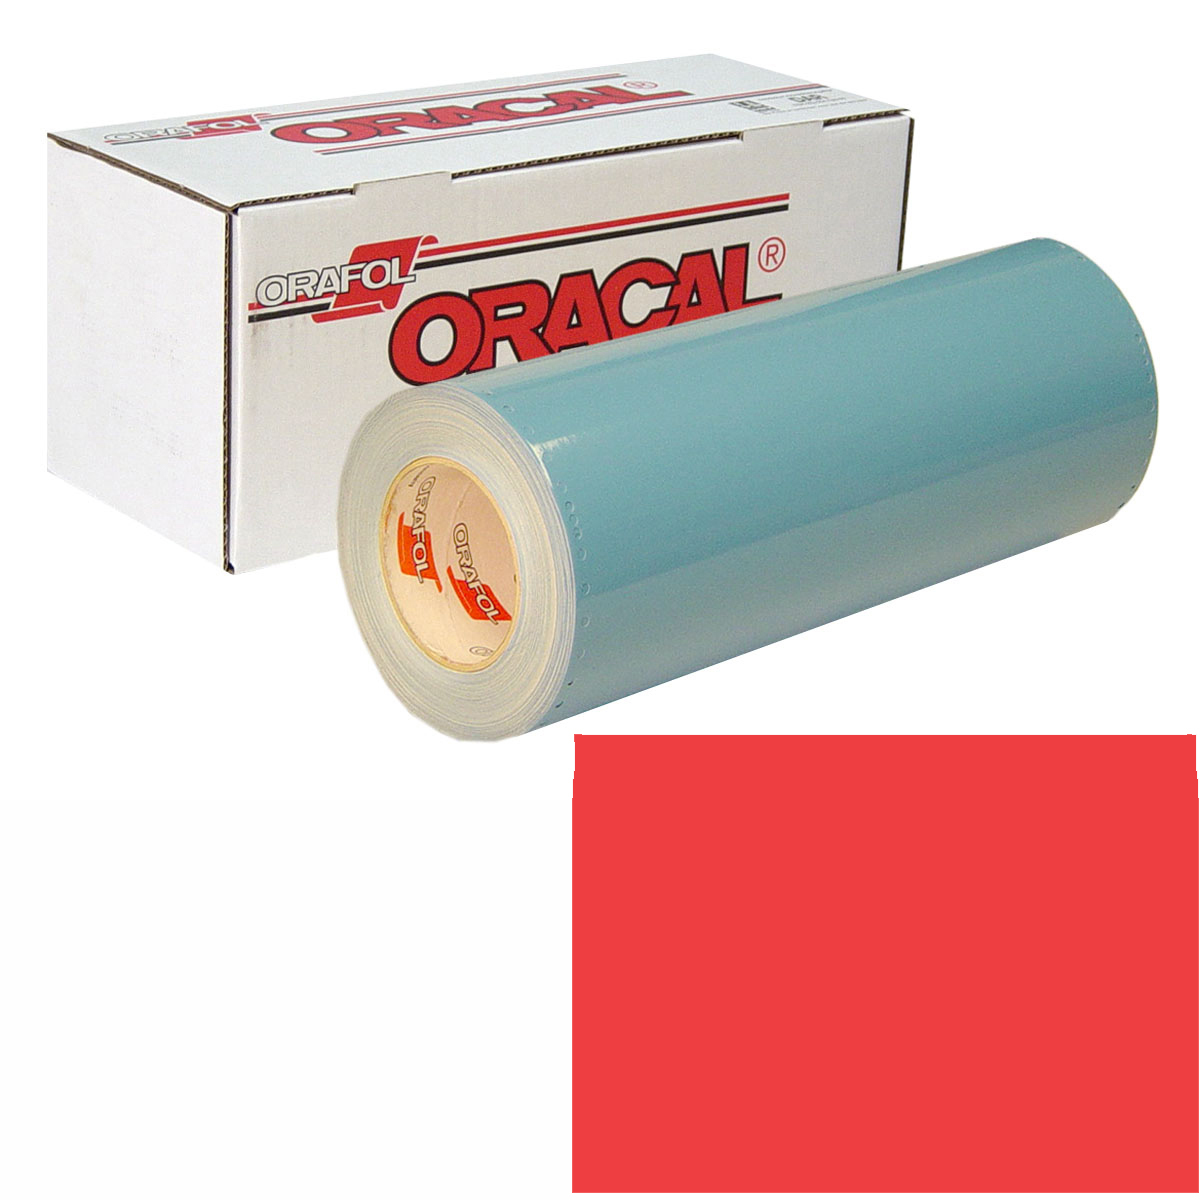 ORACAL 751 30in X 10yd 027 Tomato Red